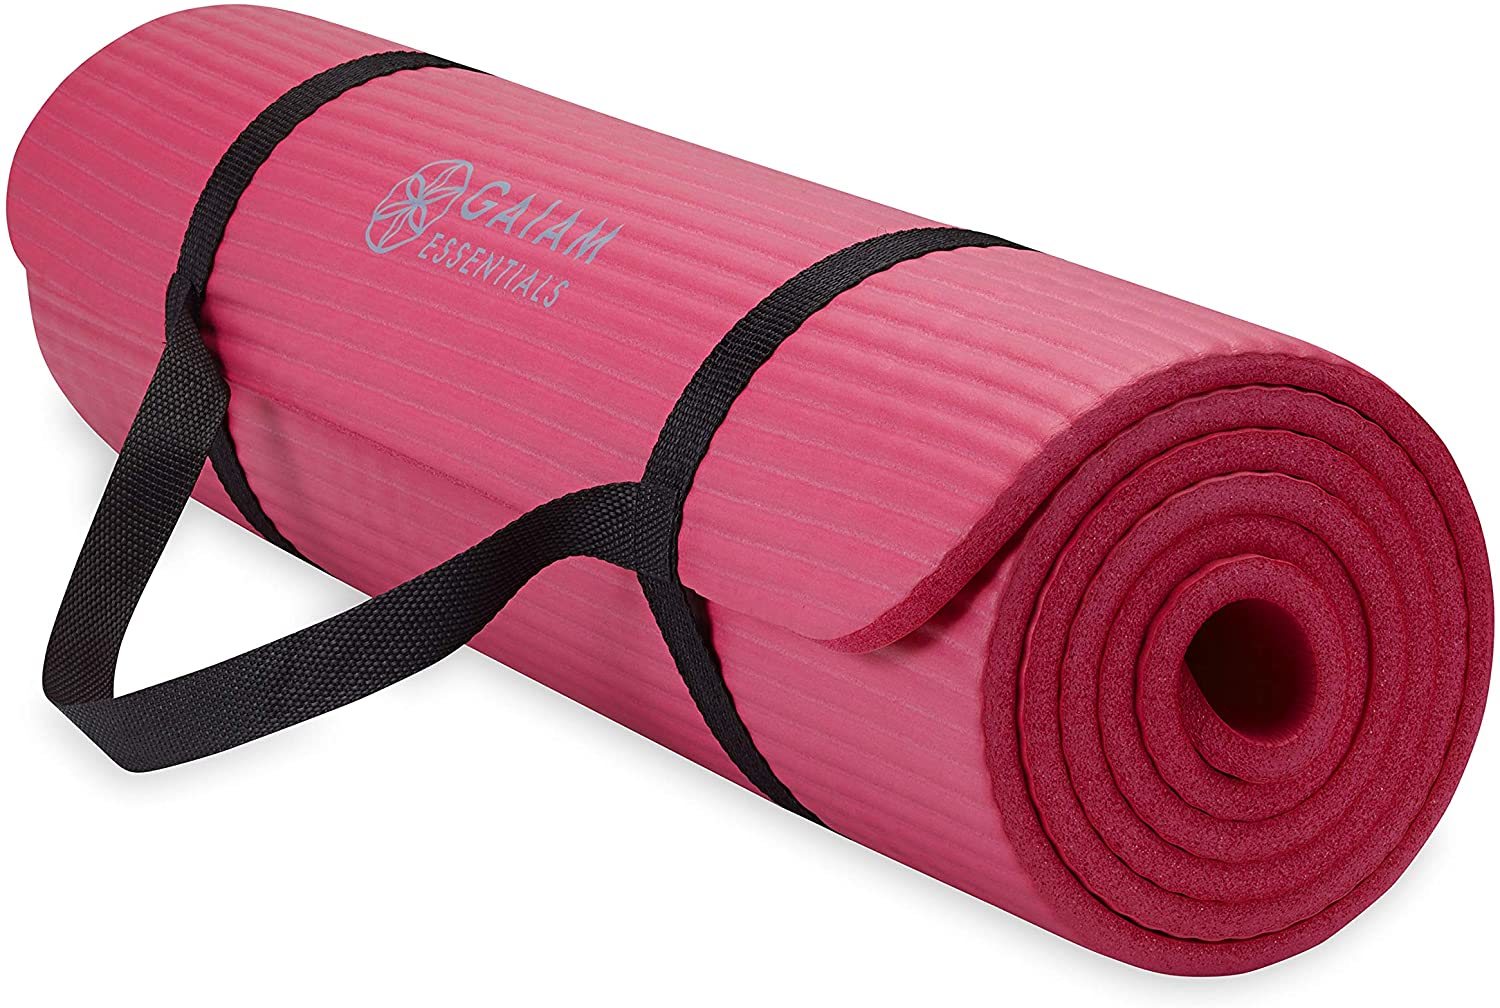 Extra Thick 10mm Giam Yoga Mat (Pink)